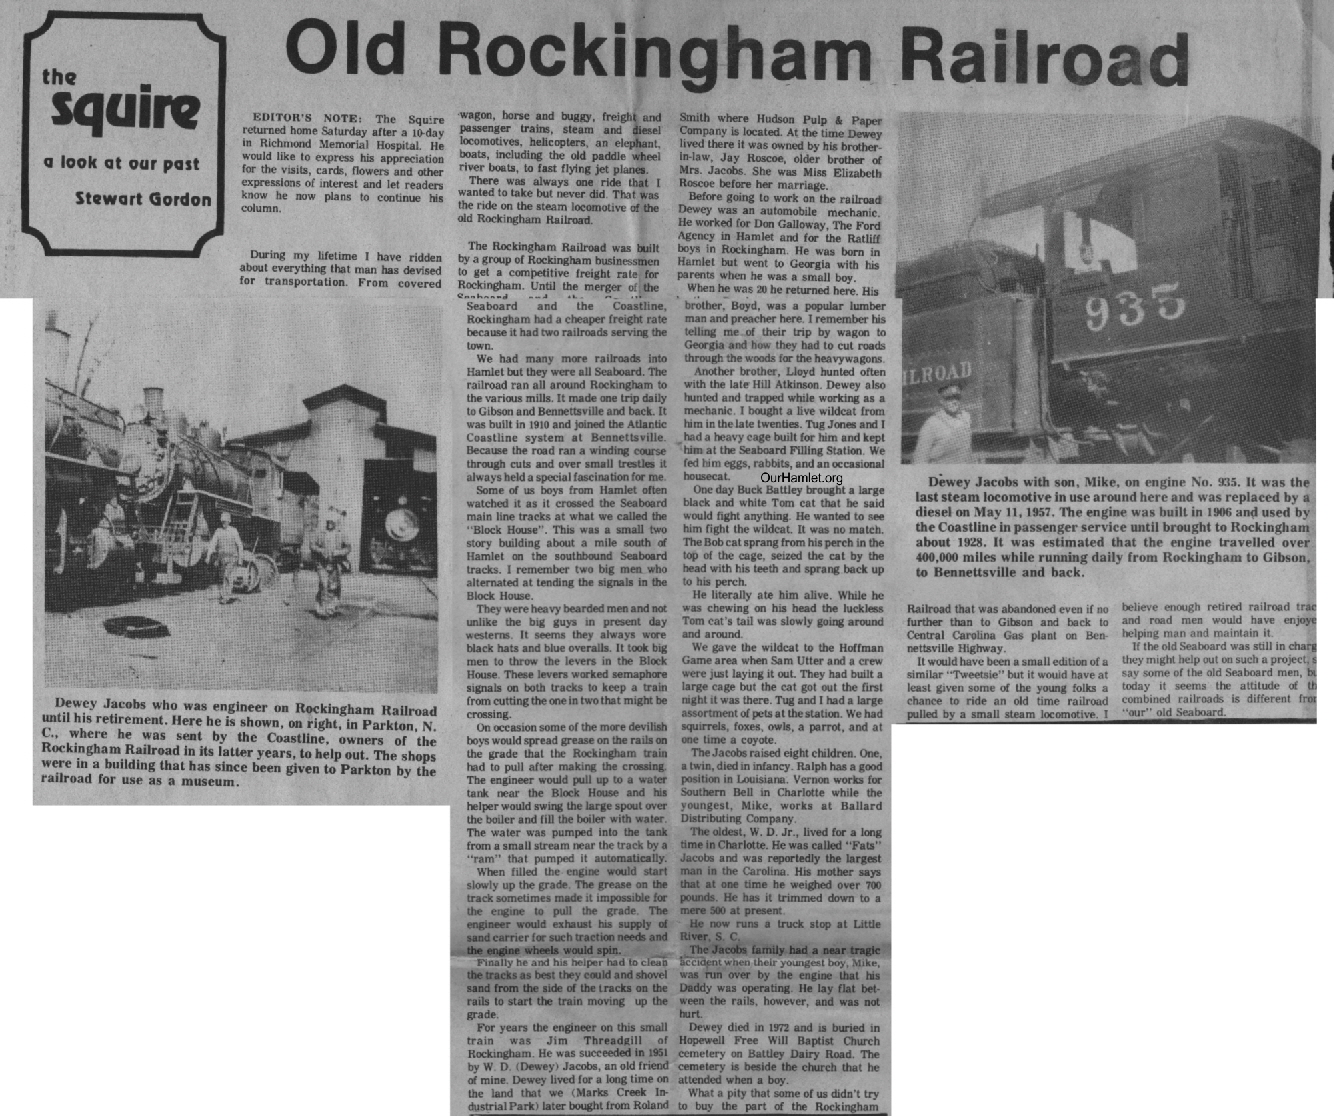 The Squire - Old Rockingham Railroad OH